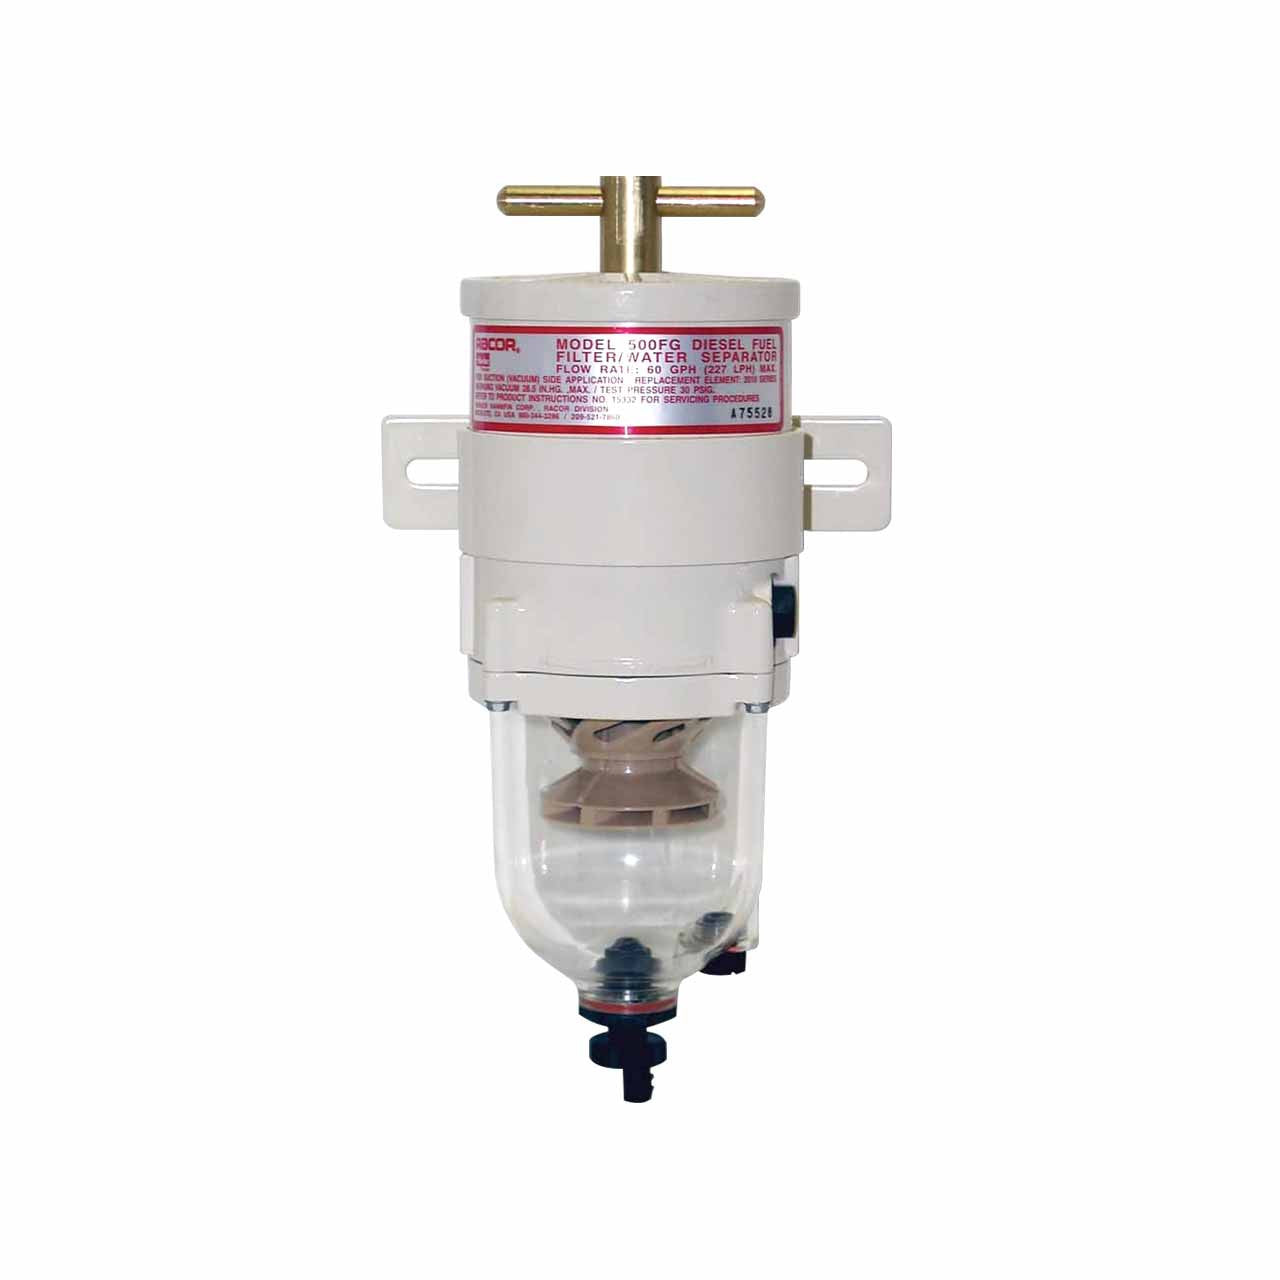 2 Micron Turbine Fuel Filter Water Separator with Clear Plastic Bowl - Racor 500FG2 Turbine Series